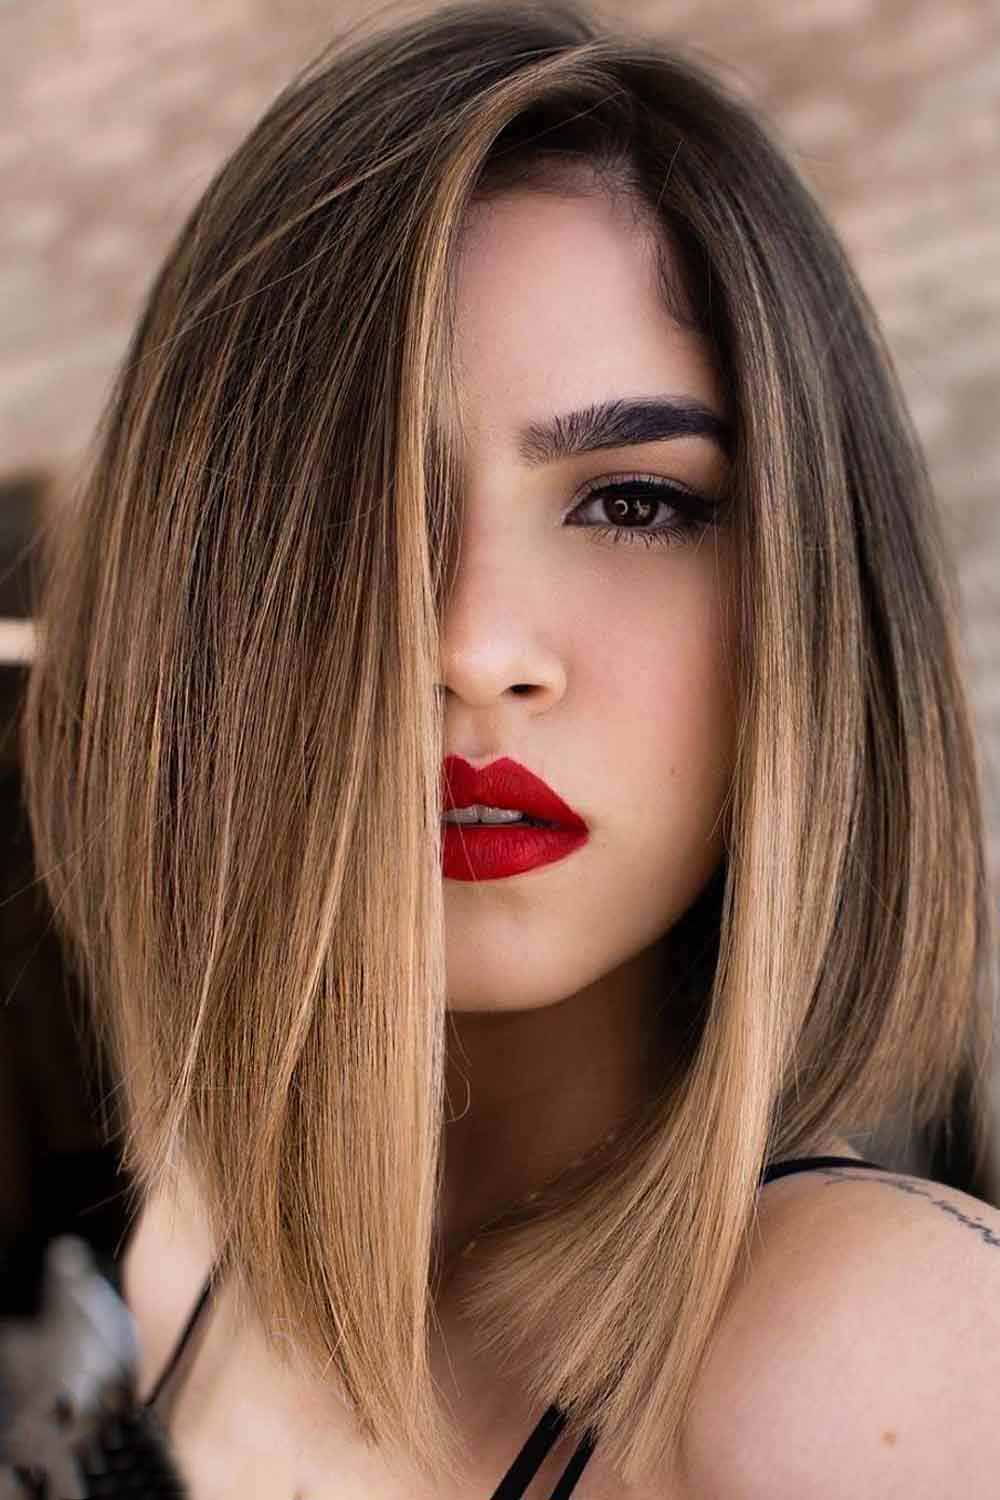 Straight Lob With Layered Ends Hairstyle #mediumhaircut #layeredhaircut